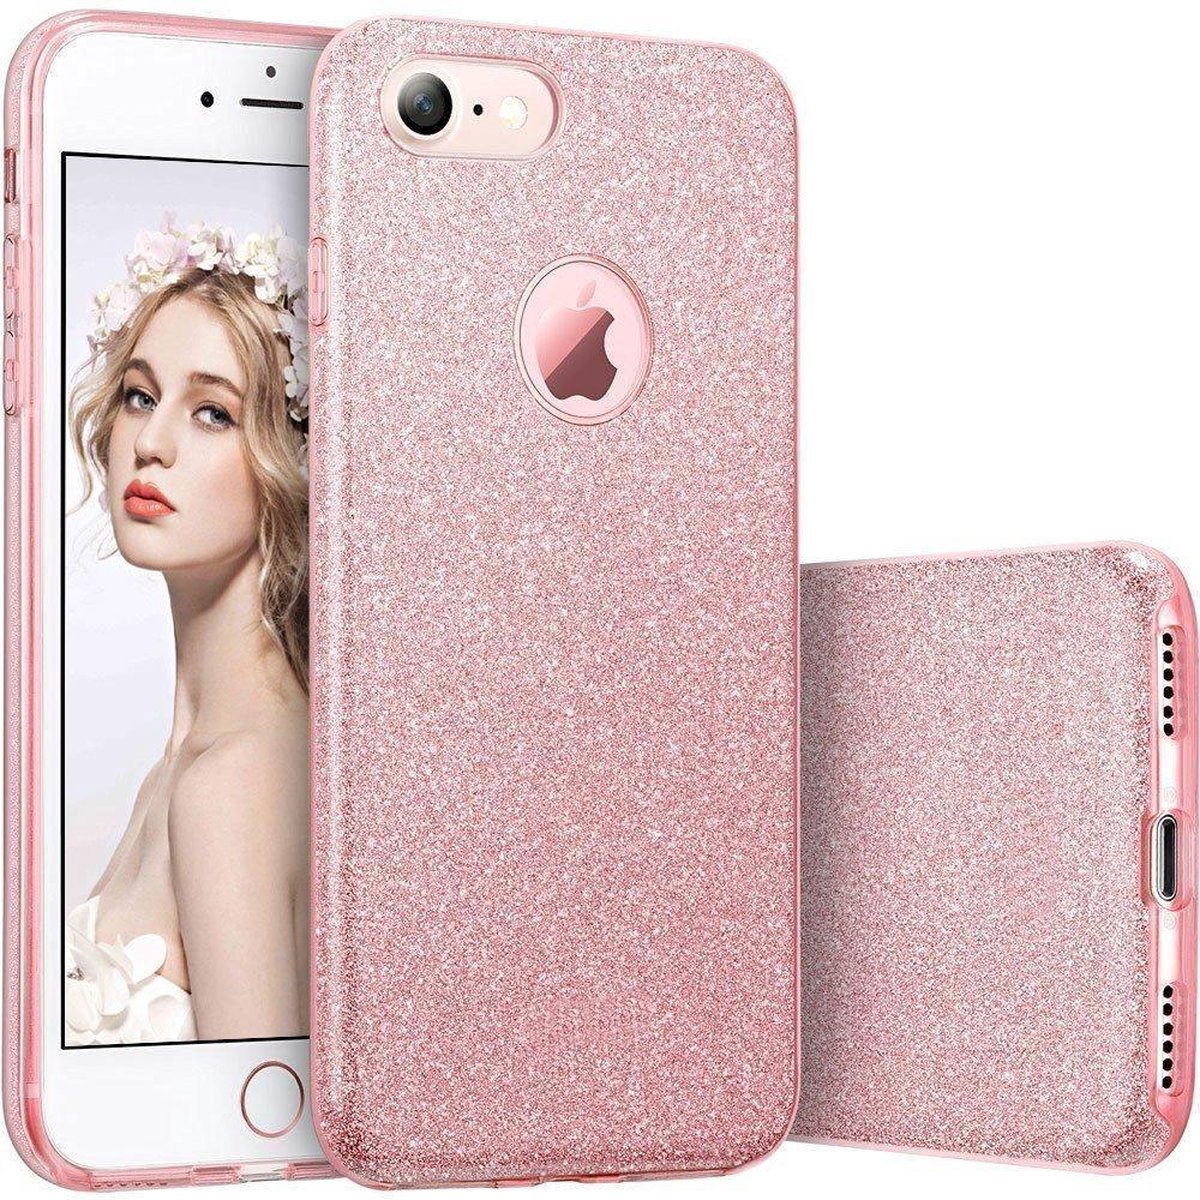 Hoesje geschikt voor iPhone SE 2022 / 2020 / 8 / 7 - Glitter Back Cover Bling Siliconen Case Hoes Roze - iCall